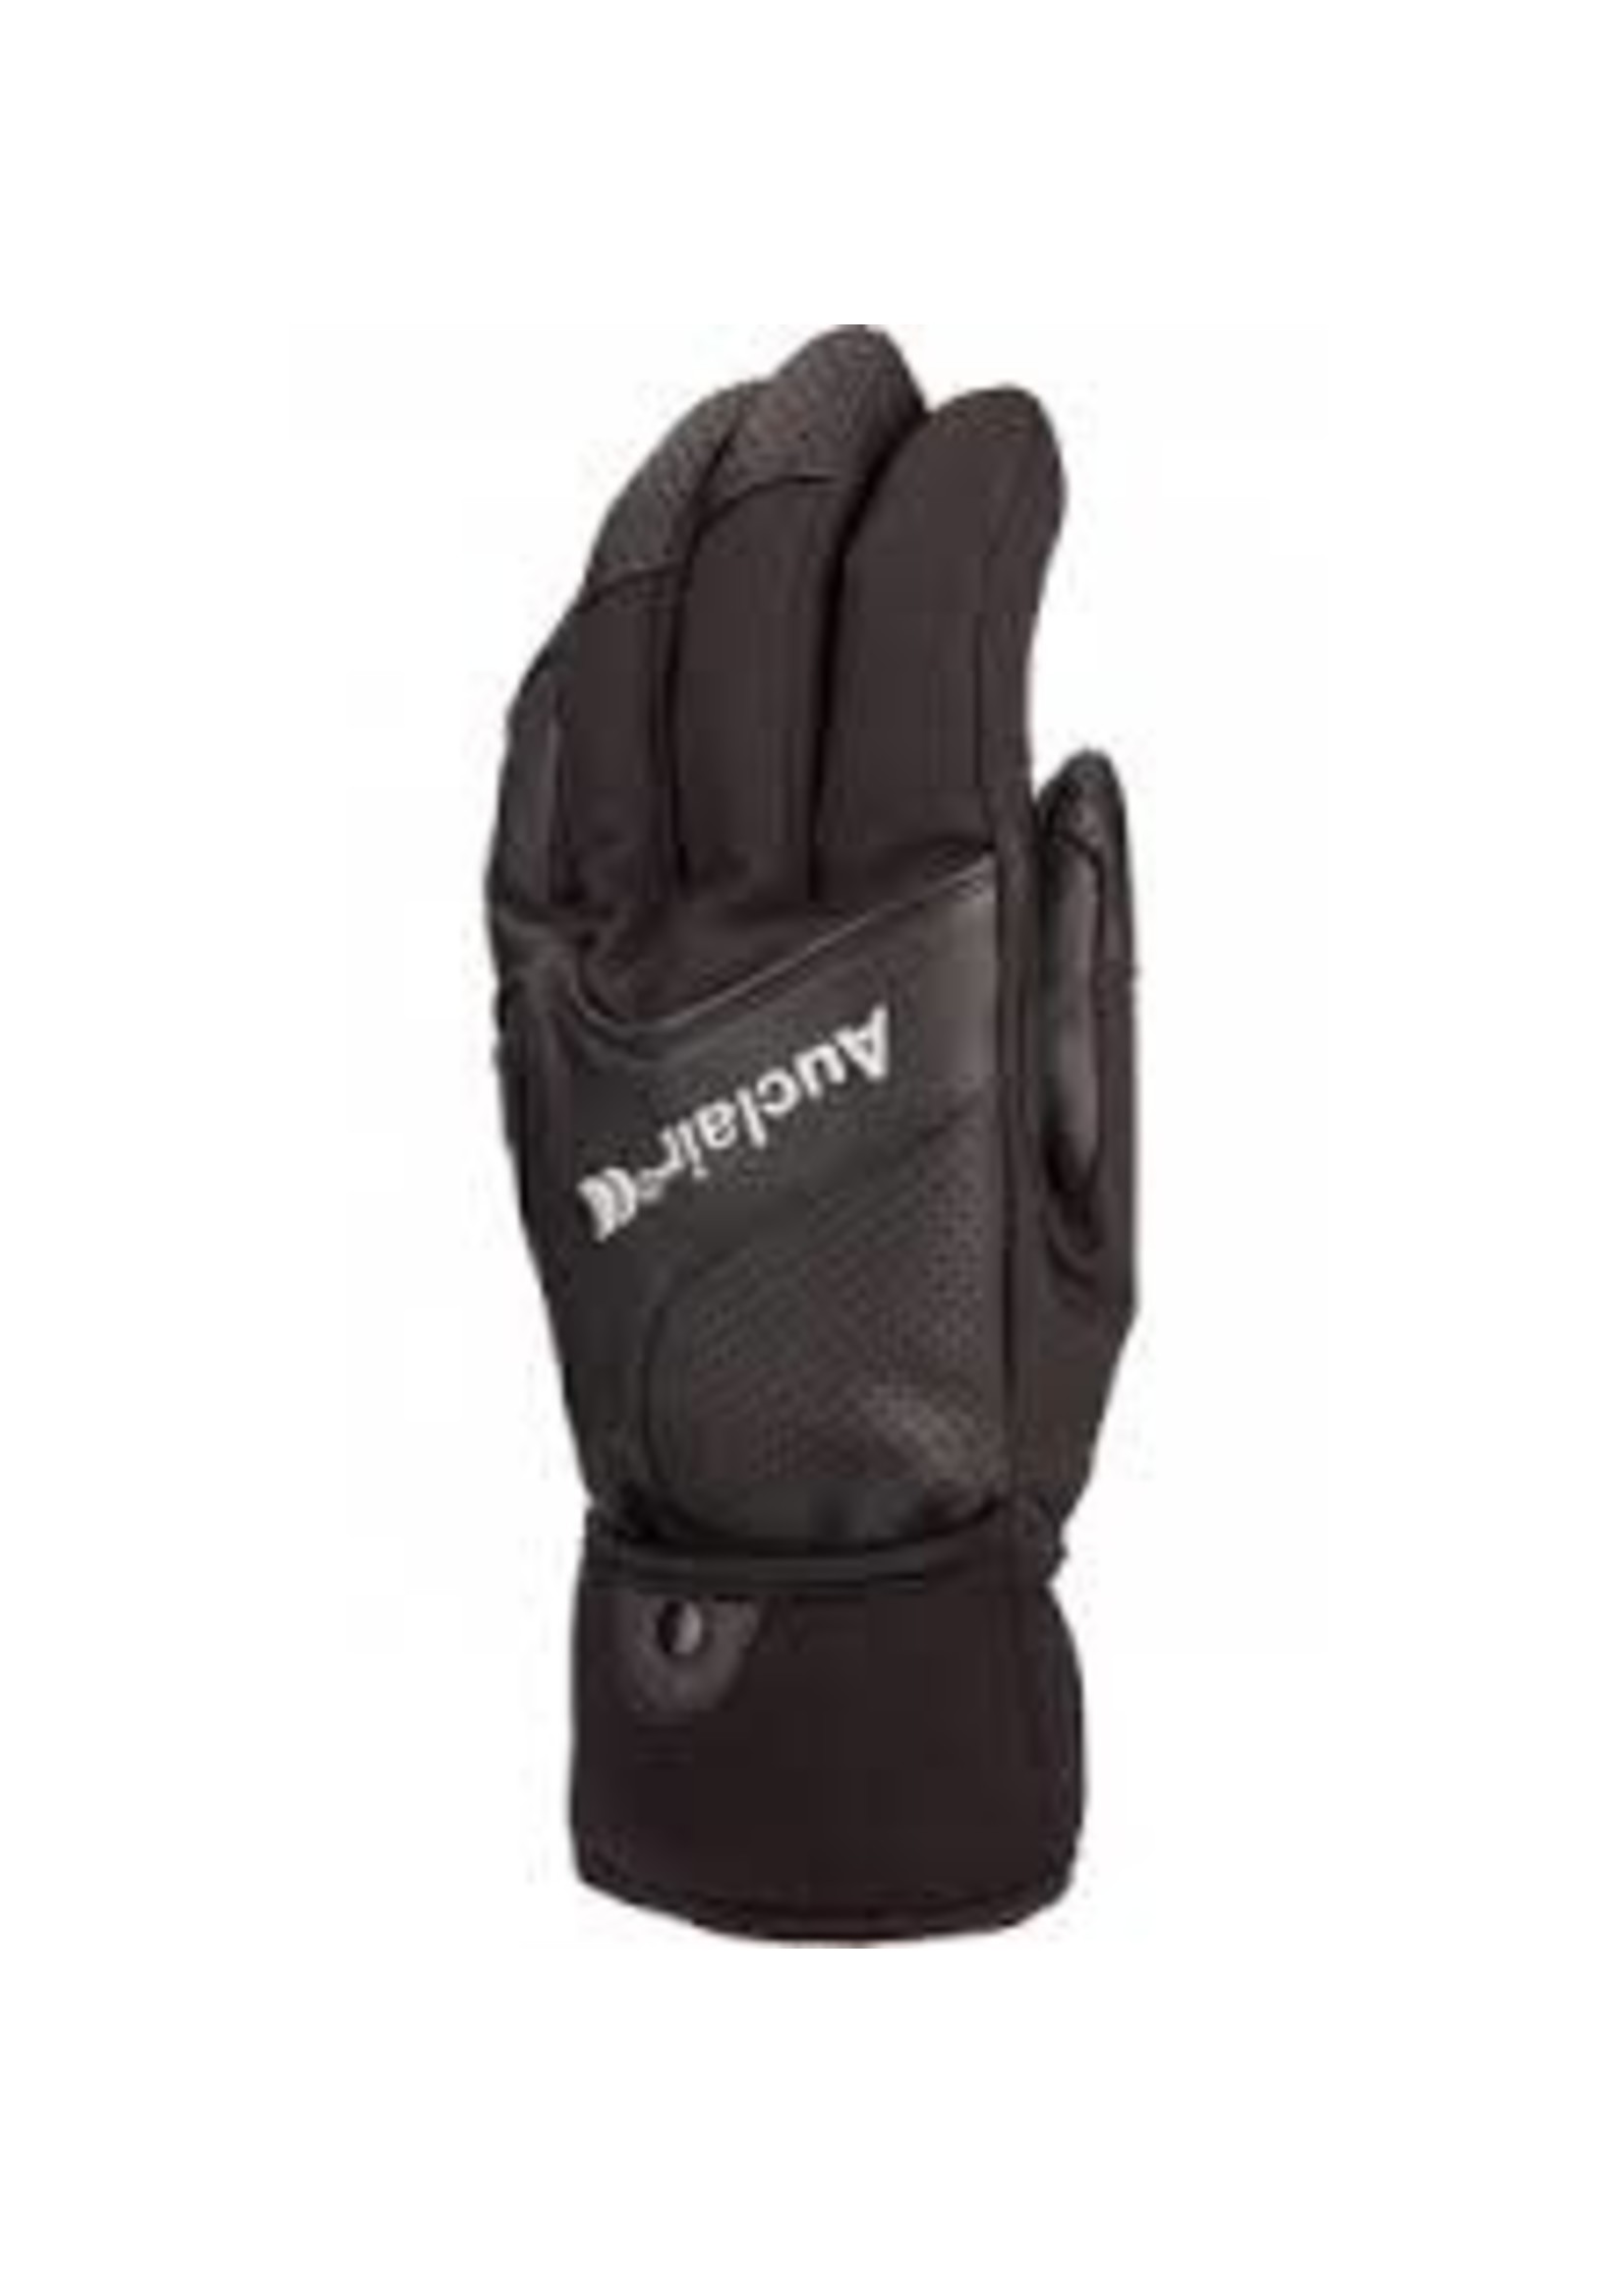 AUCLAIR DIAMOND PEAK GLOVES WITH COVER AND LINER